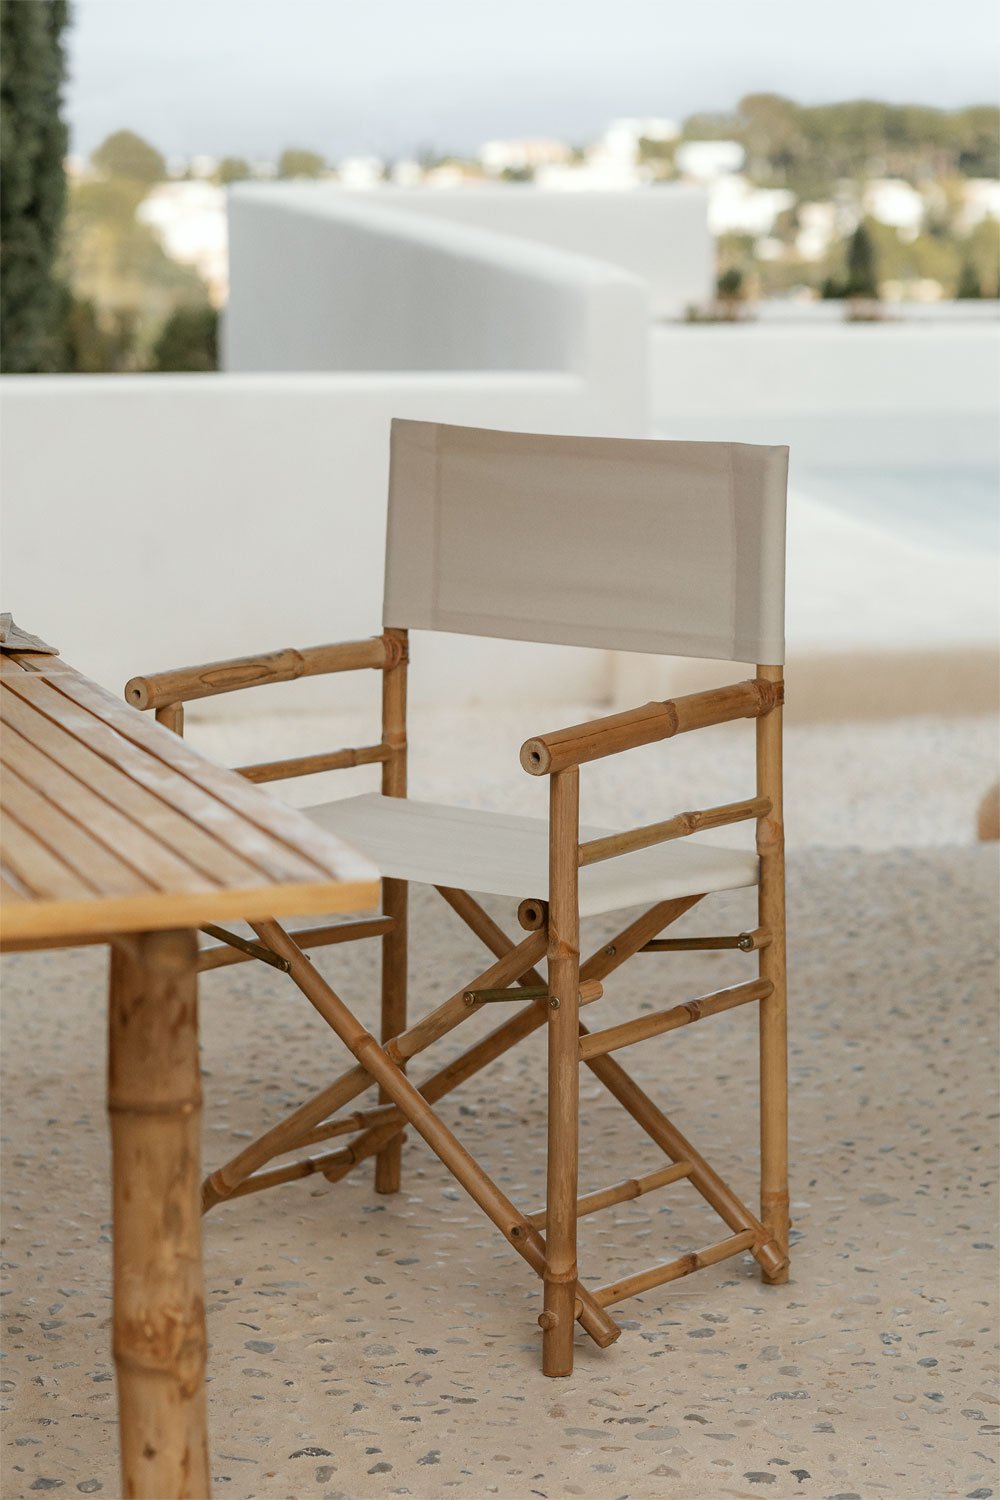 Folding Director's Chair in Bamboo for Garden Woody, gallery image 1